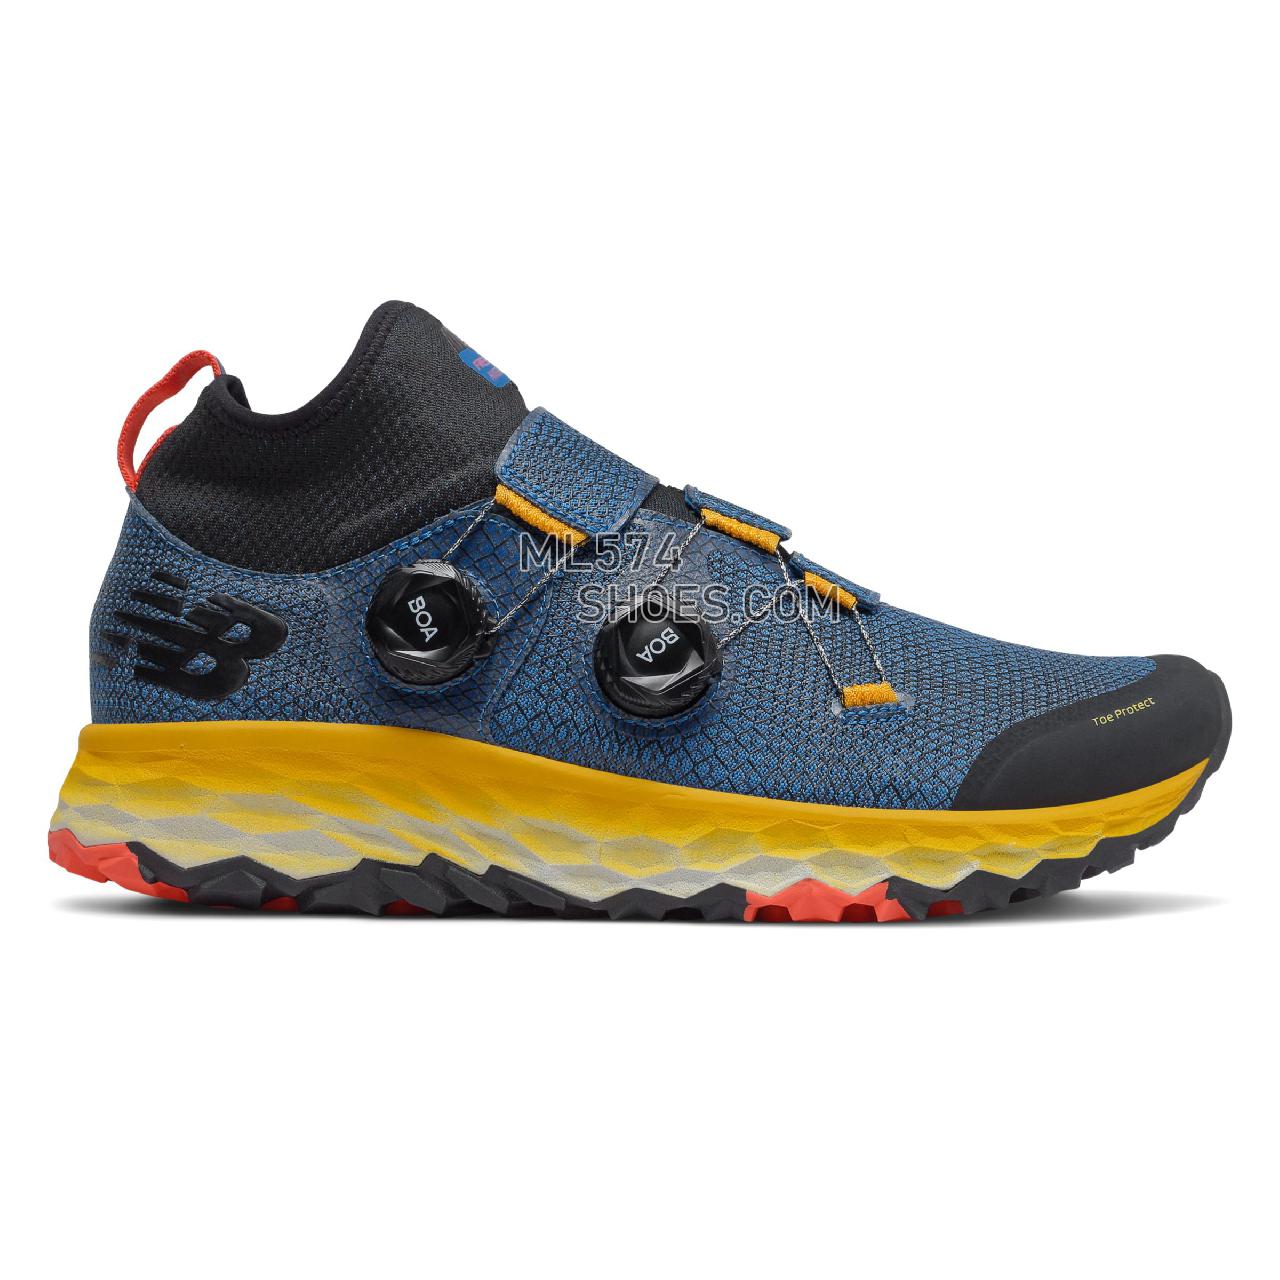 New Balance Fresh Foam Hierro Boa - Men's Trail Running - Neo Classic Blue with Varsity Gold and Black - MTHBOABY